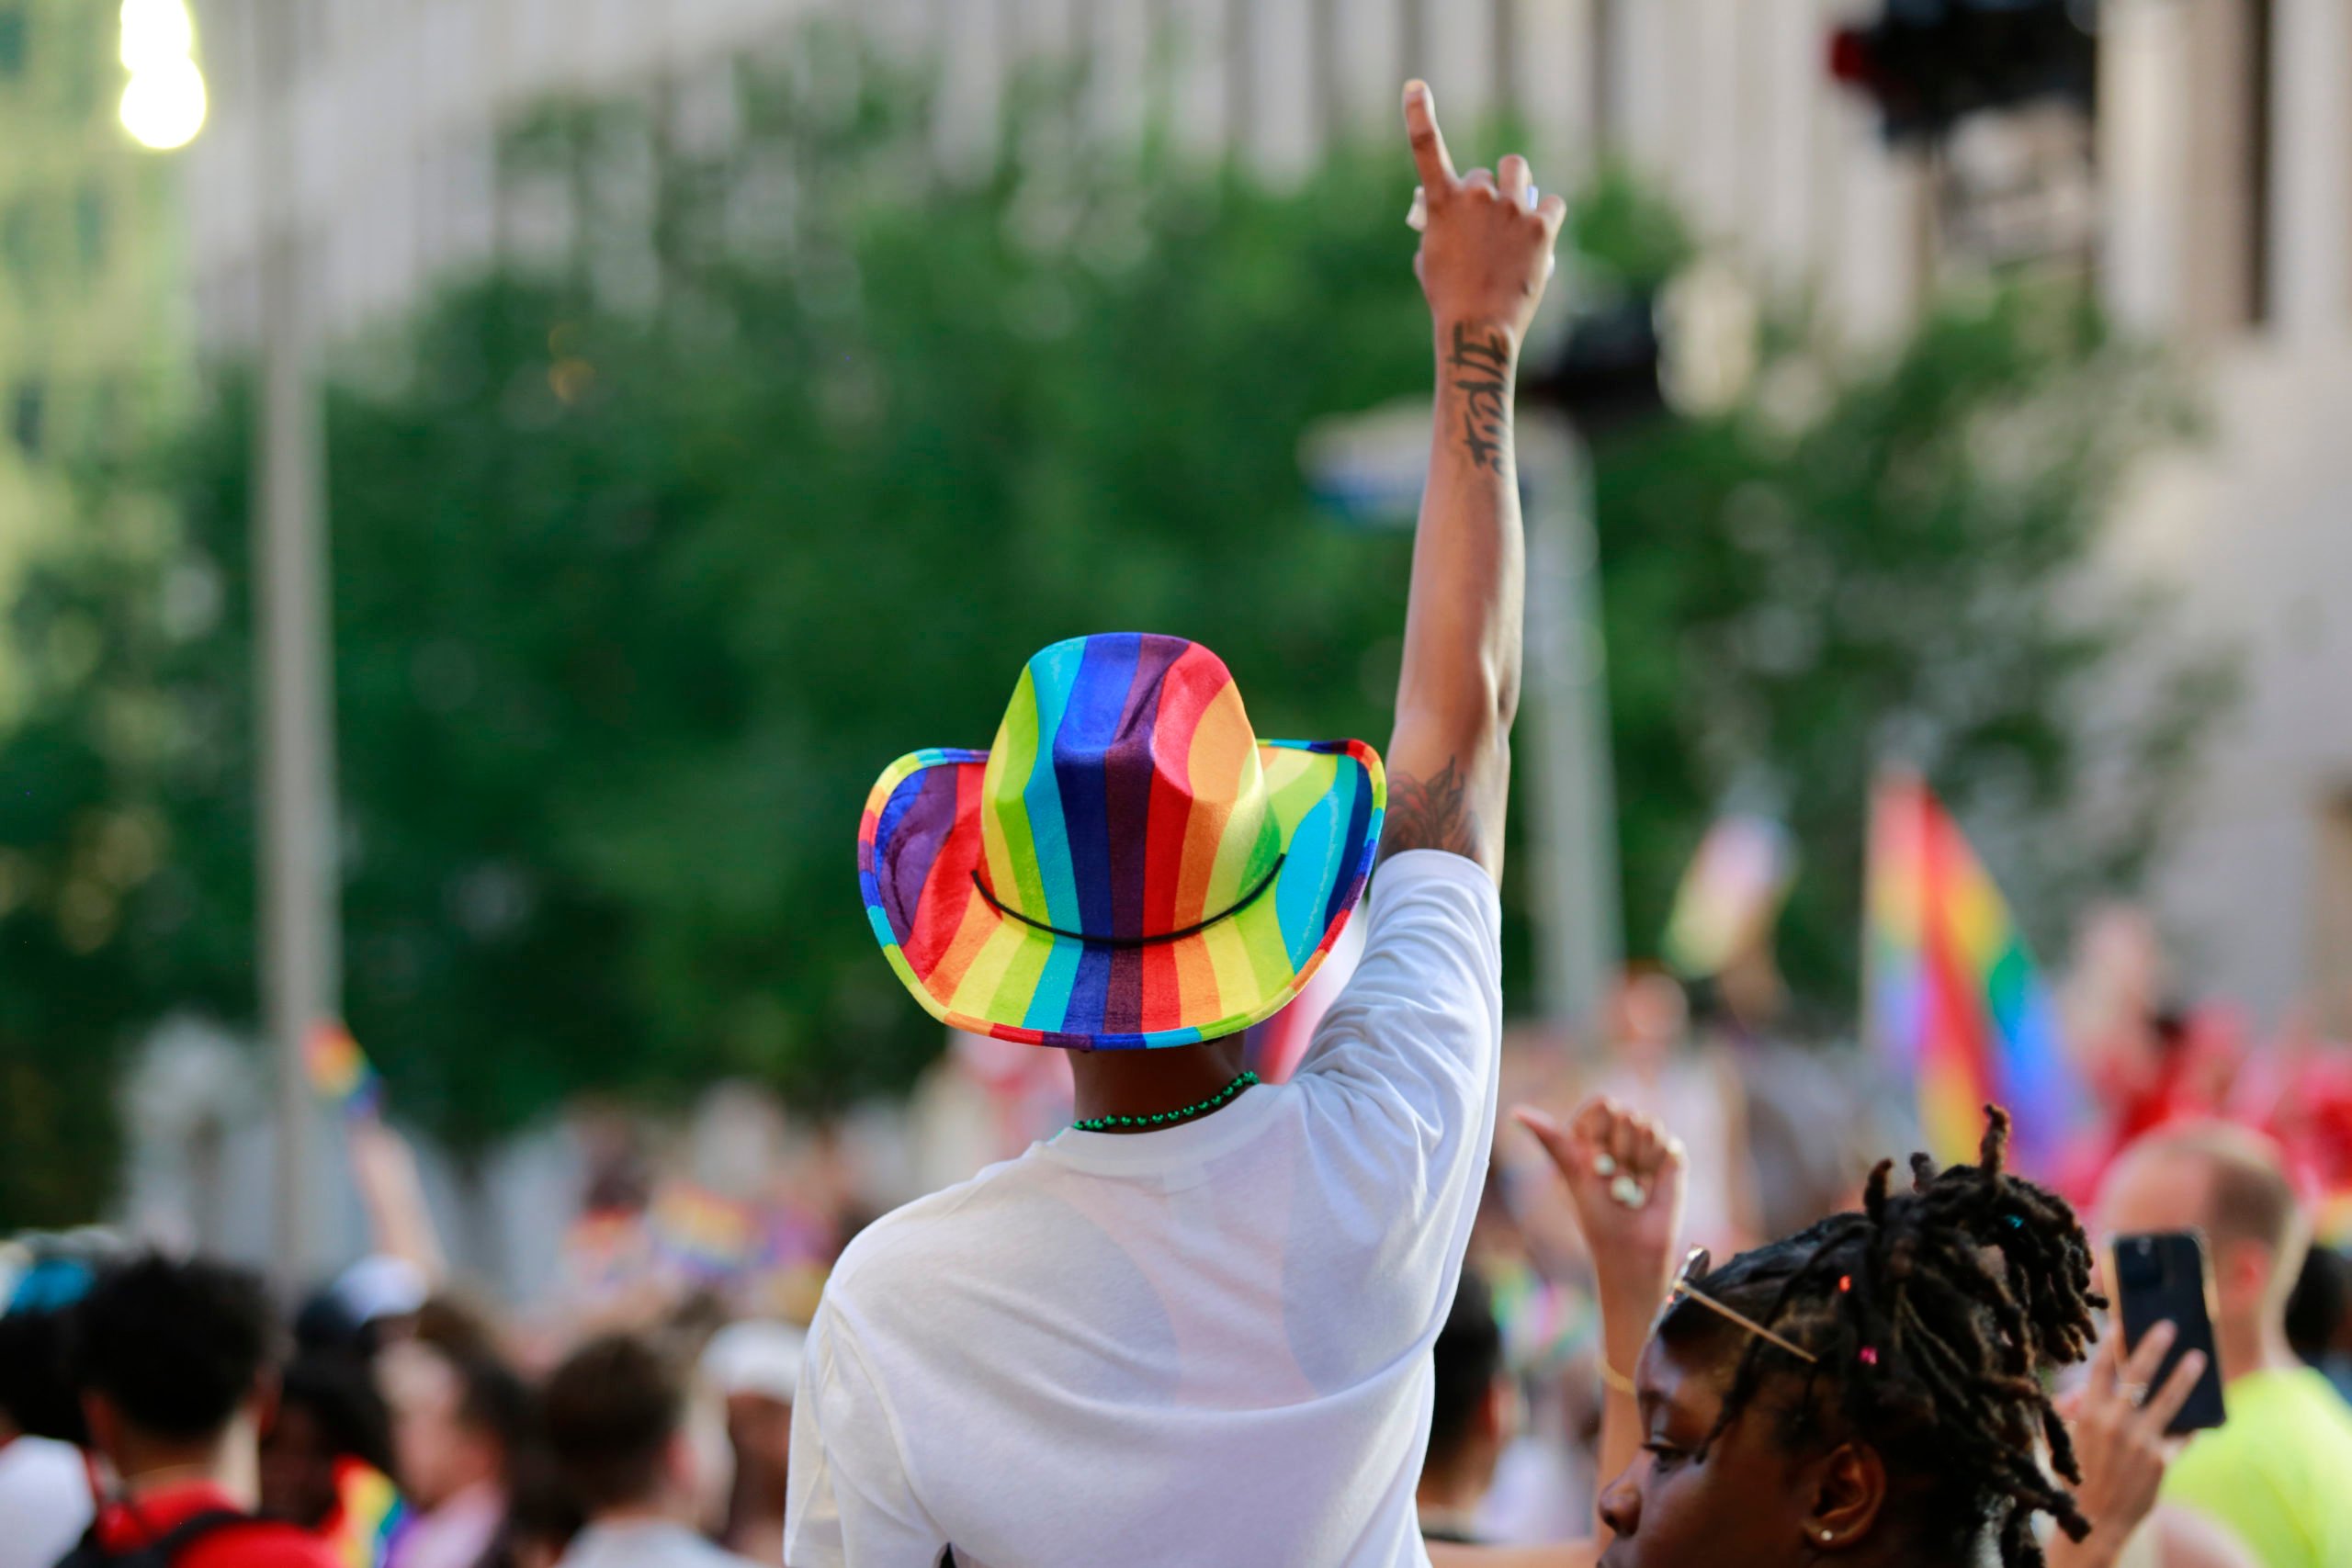 At a Pride Parade in Houston, a marcher in a white tee and pride rainbow cowboy hat salutes with an arm upraised. In the blurry background are more marchers with Pride flags.